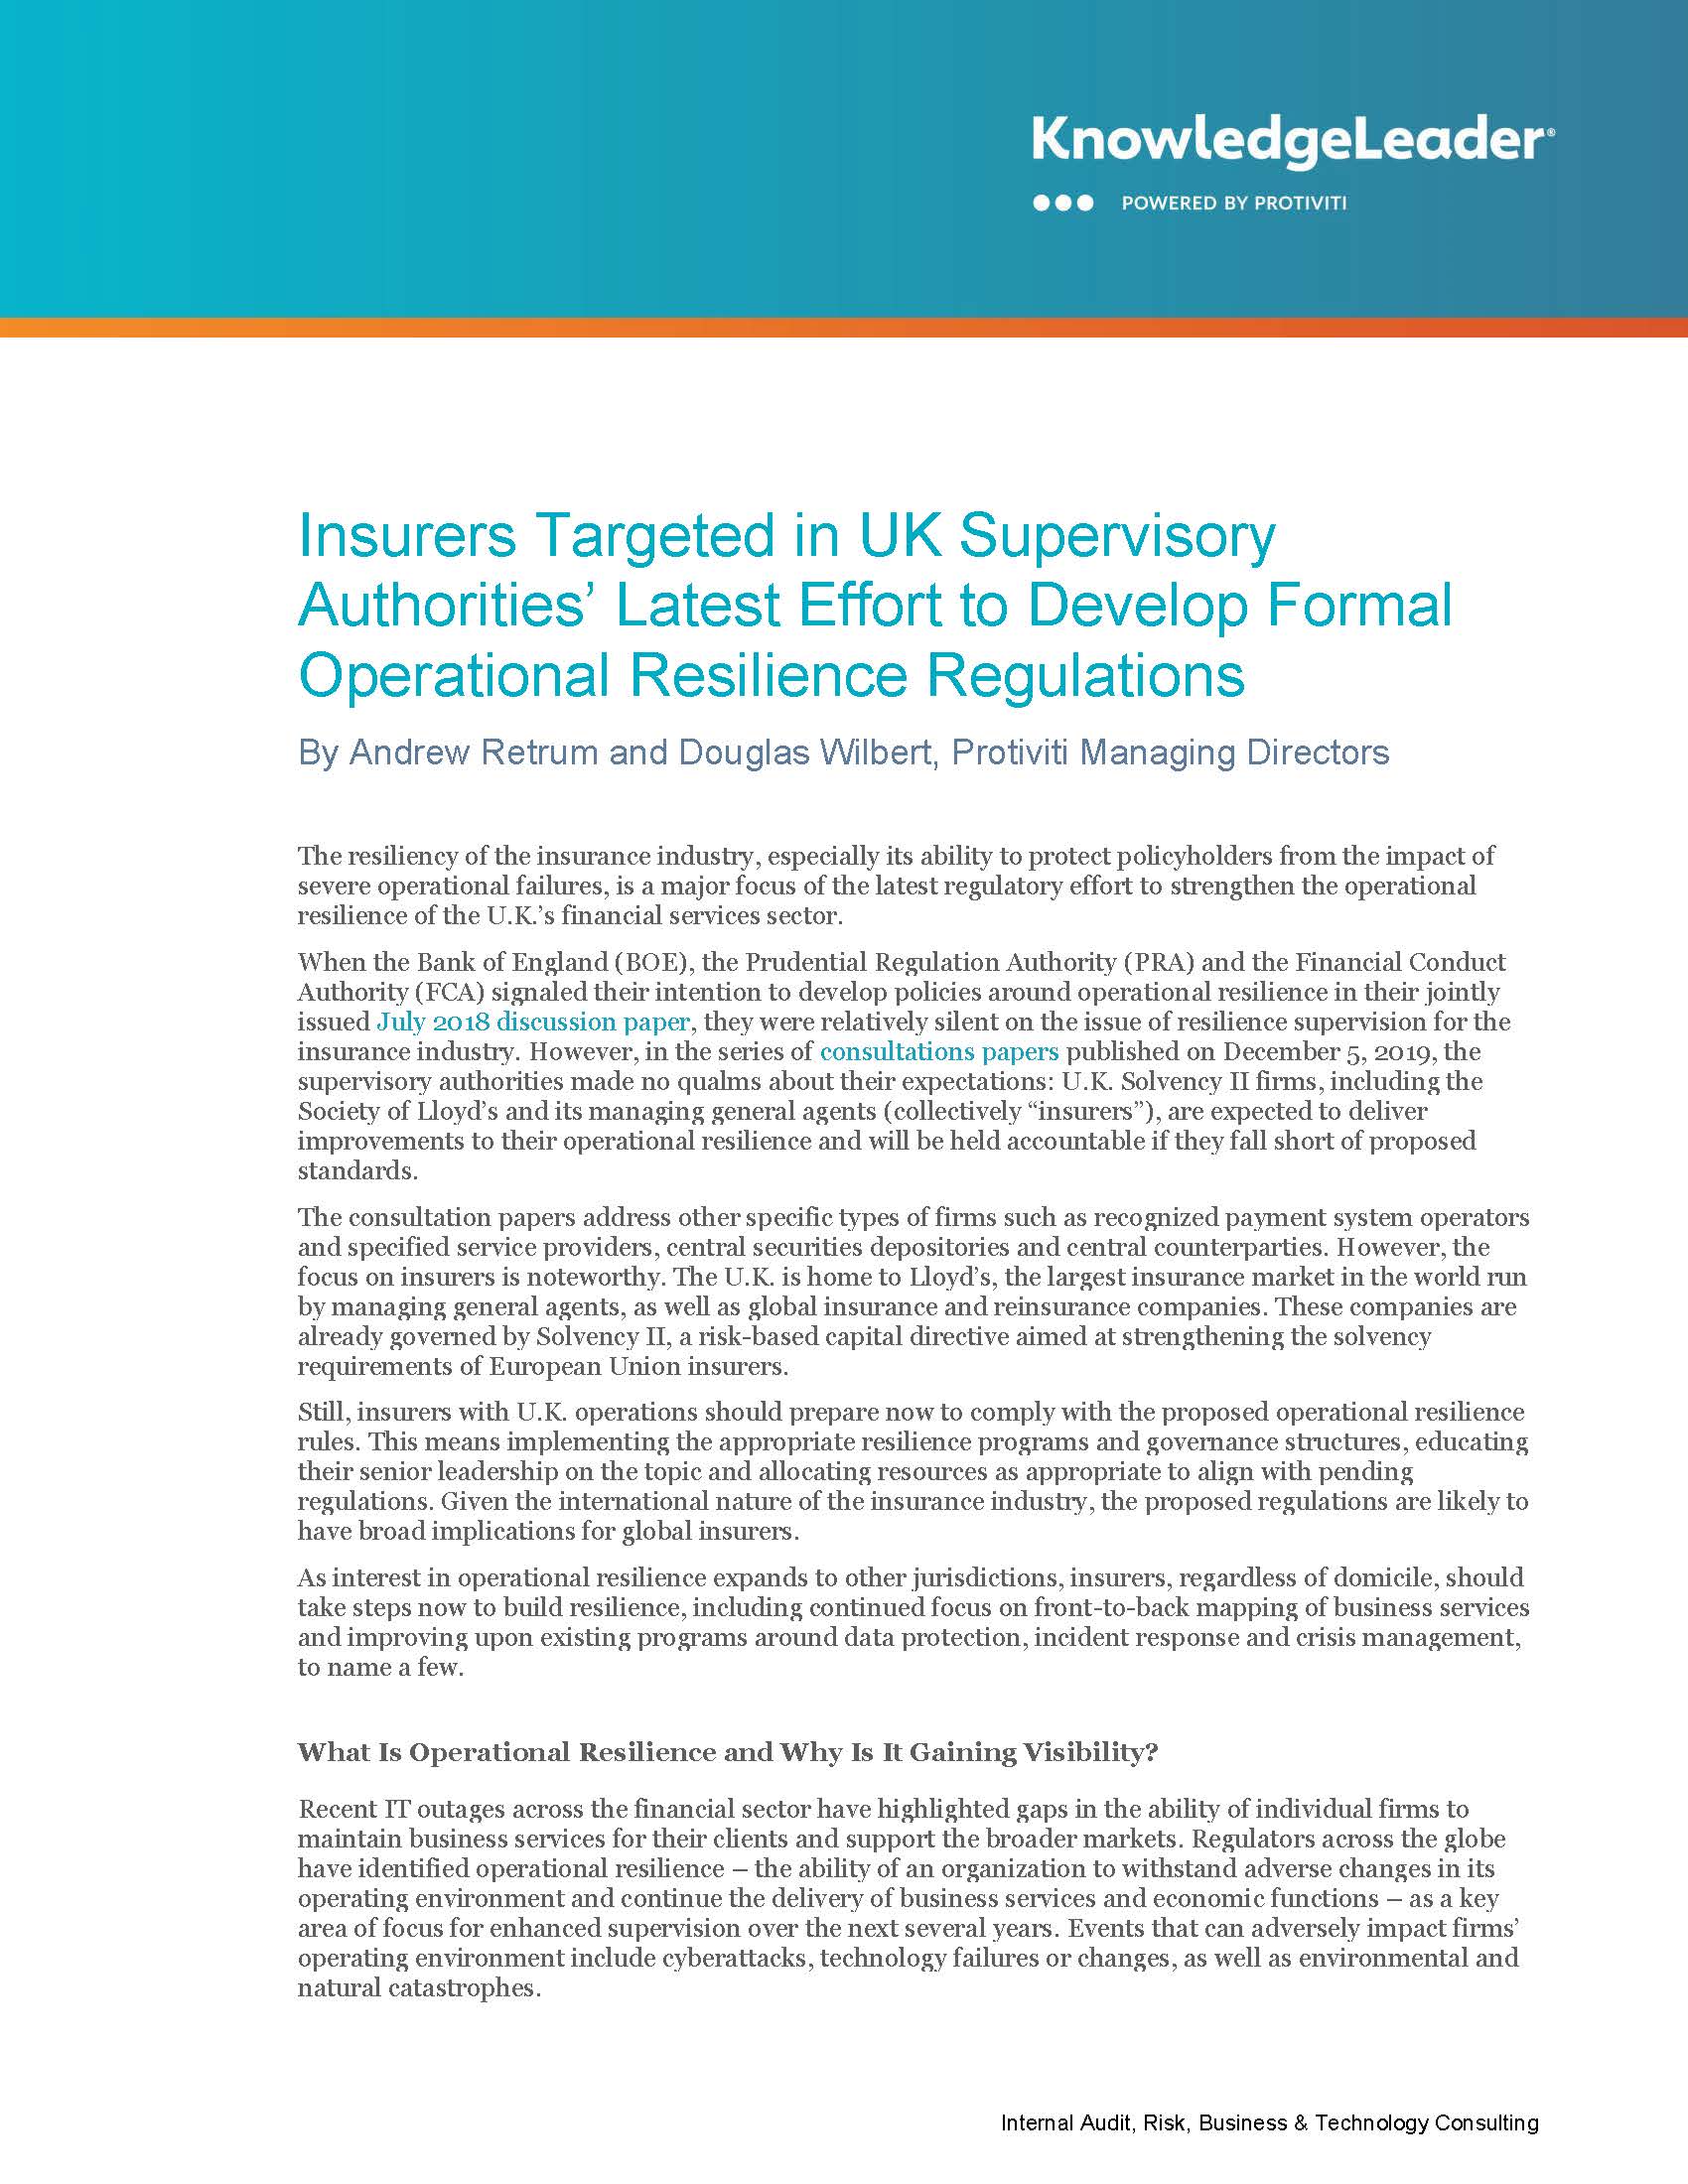 Screenshot of the first page of Insurers Targeted in UK Supervisory Authorities’ Latest Effort to Develop Formal Operational Resilience Regulations